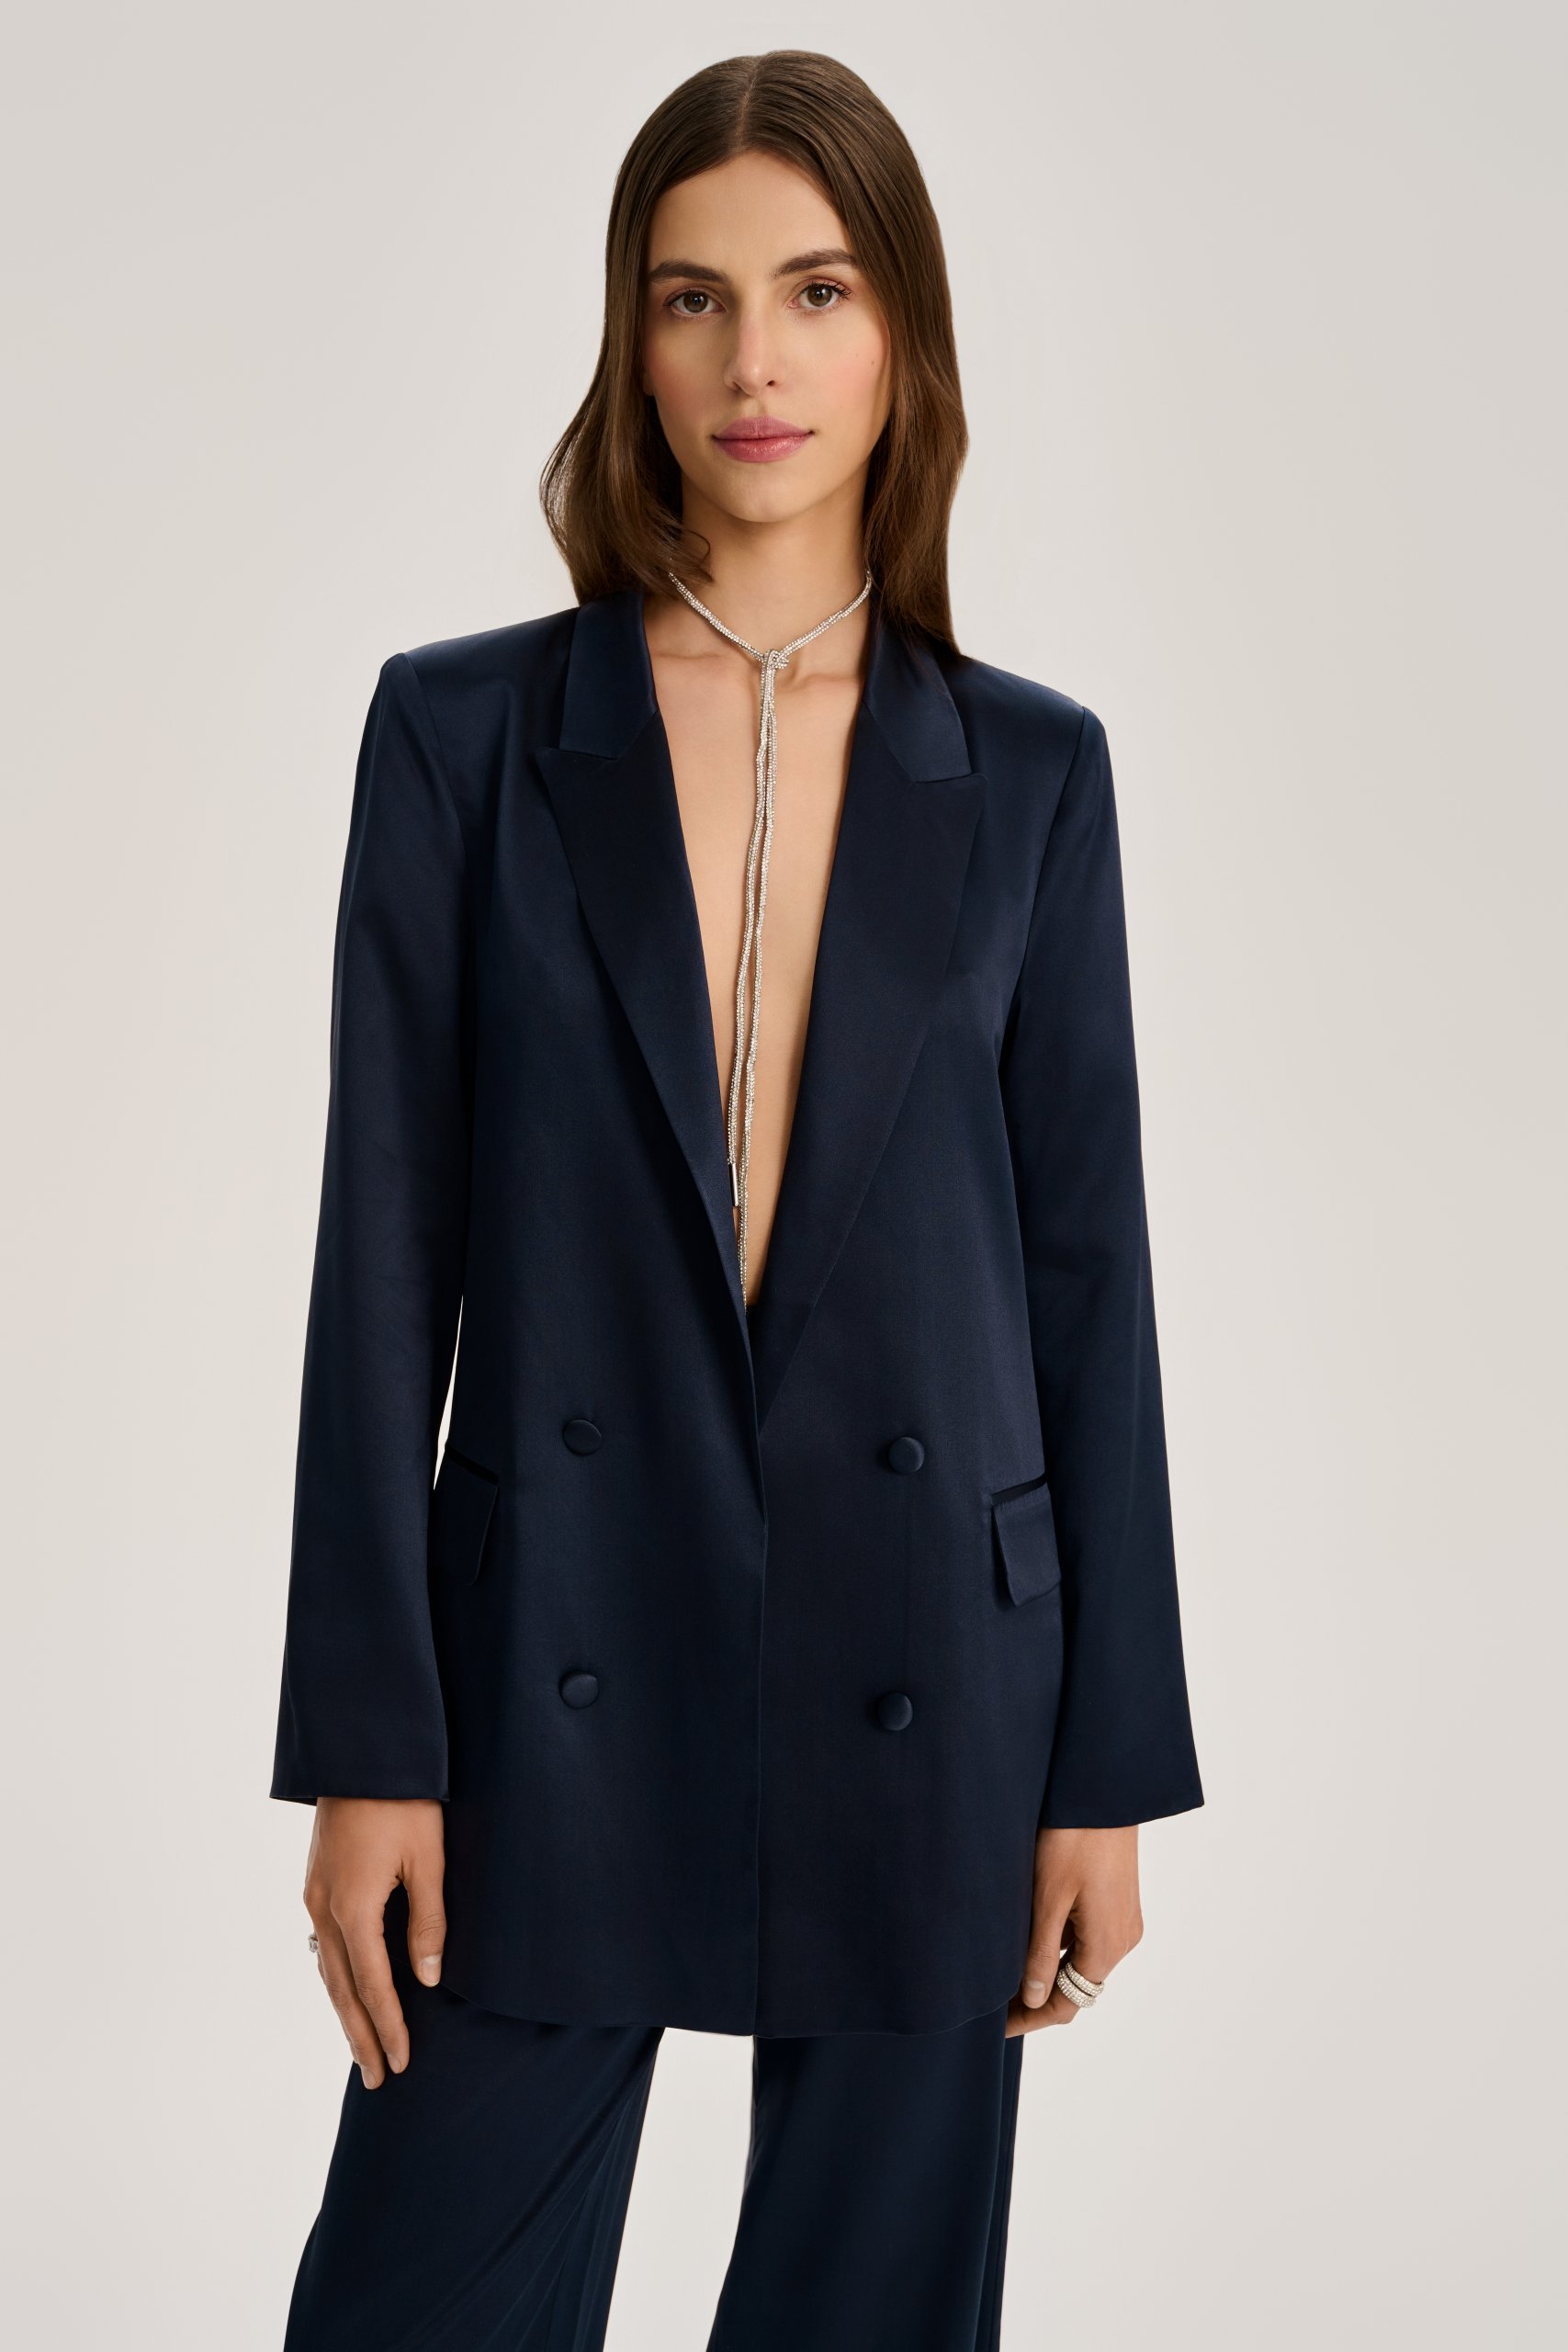 SILK SUIT JACKET FROM THE MOON COLLECTION